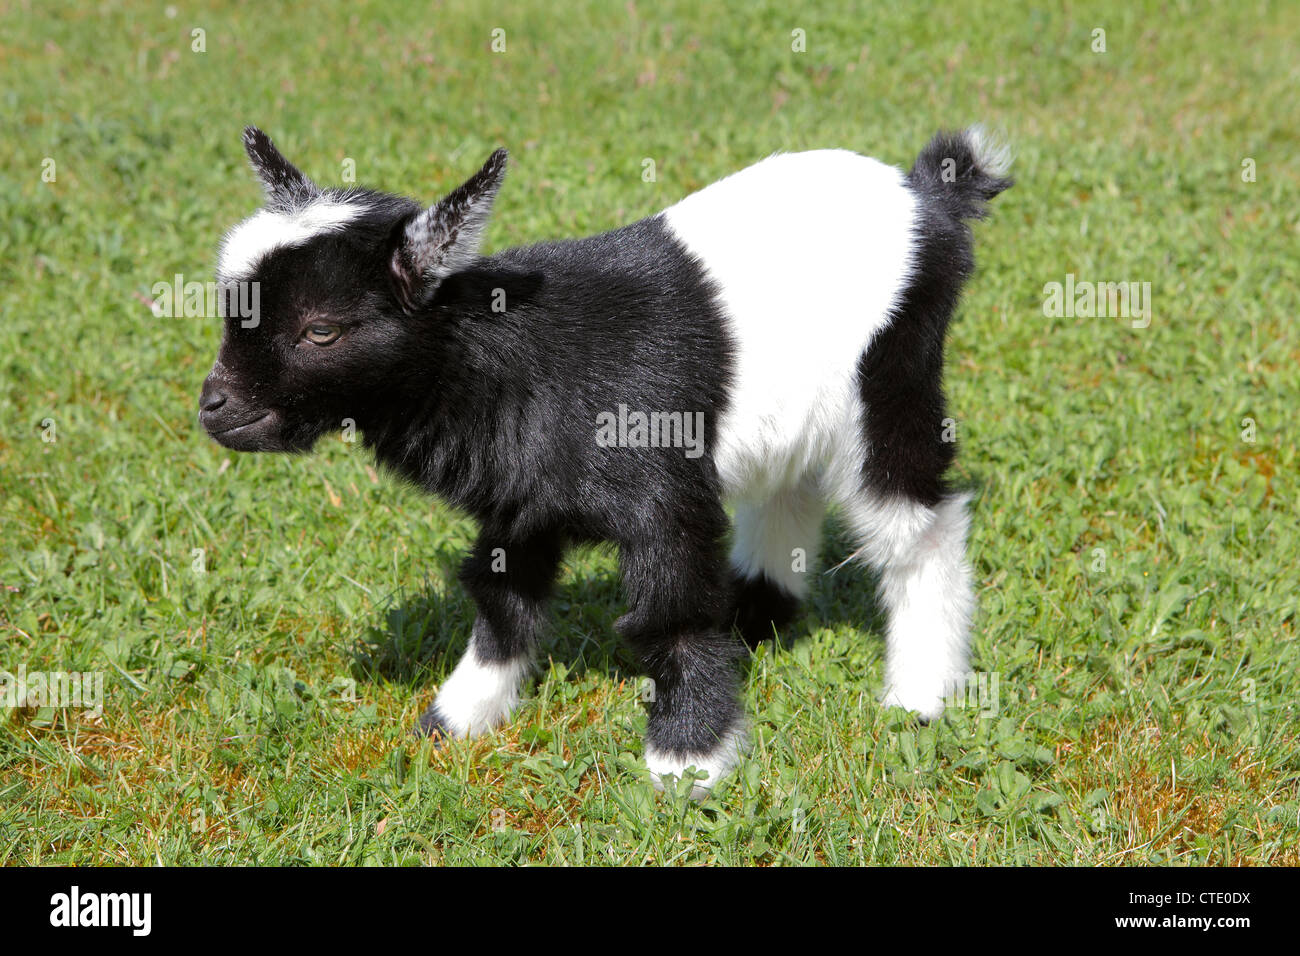 A baby Pygmy goat outdoors Stock Photo